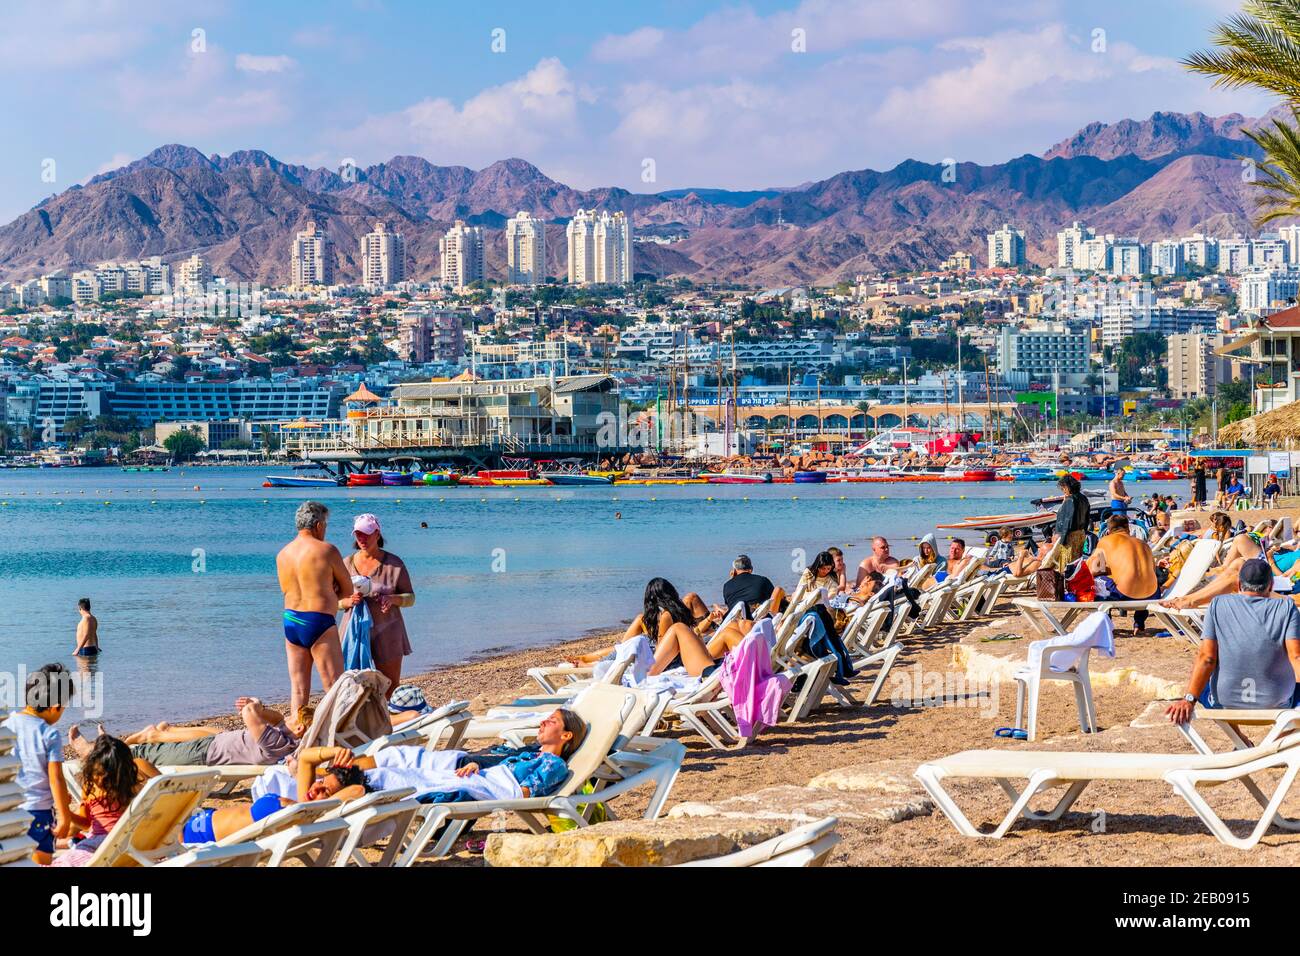 EILAT, ISRAEL, DECEMBER 30, 2018: People are enjoying a sunny day on a beach in Eilat, Israel Stock Photo